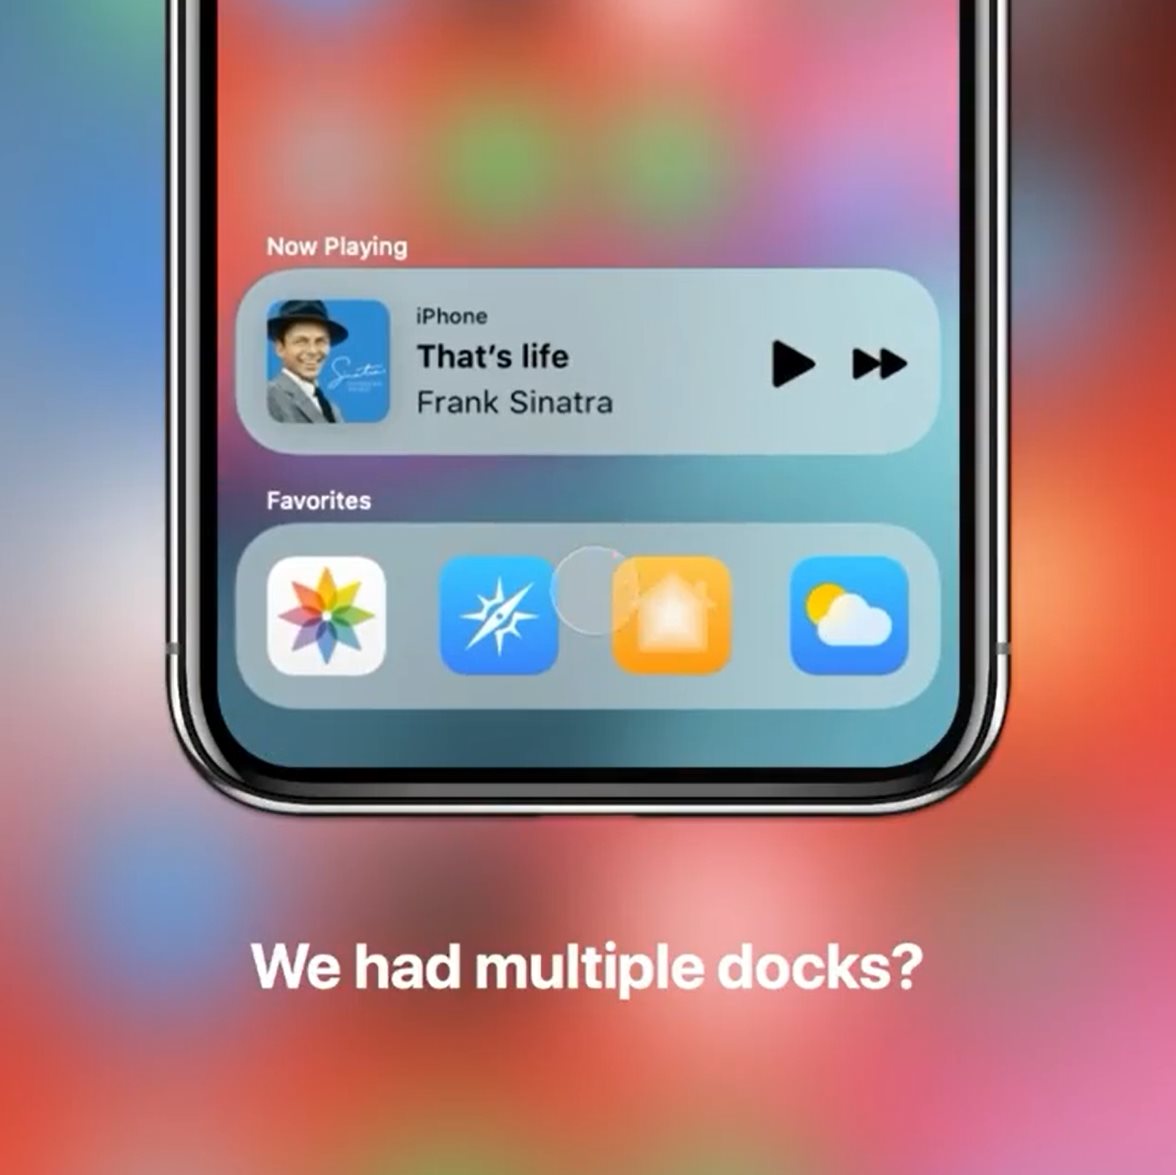 iPhone with Multiple Docks Looks too Good to Be True